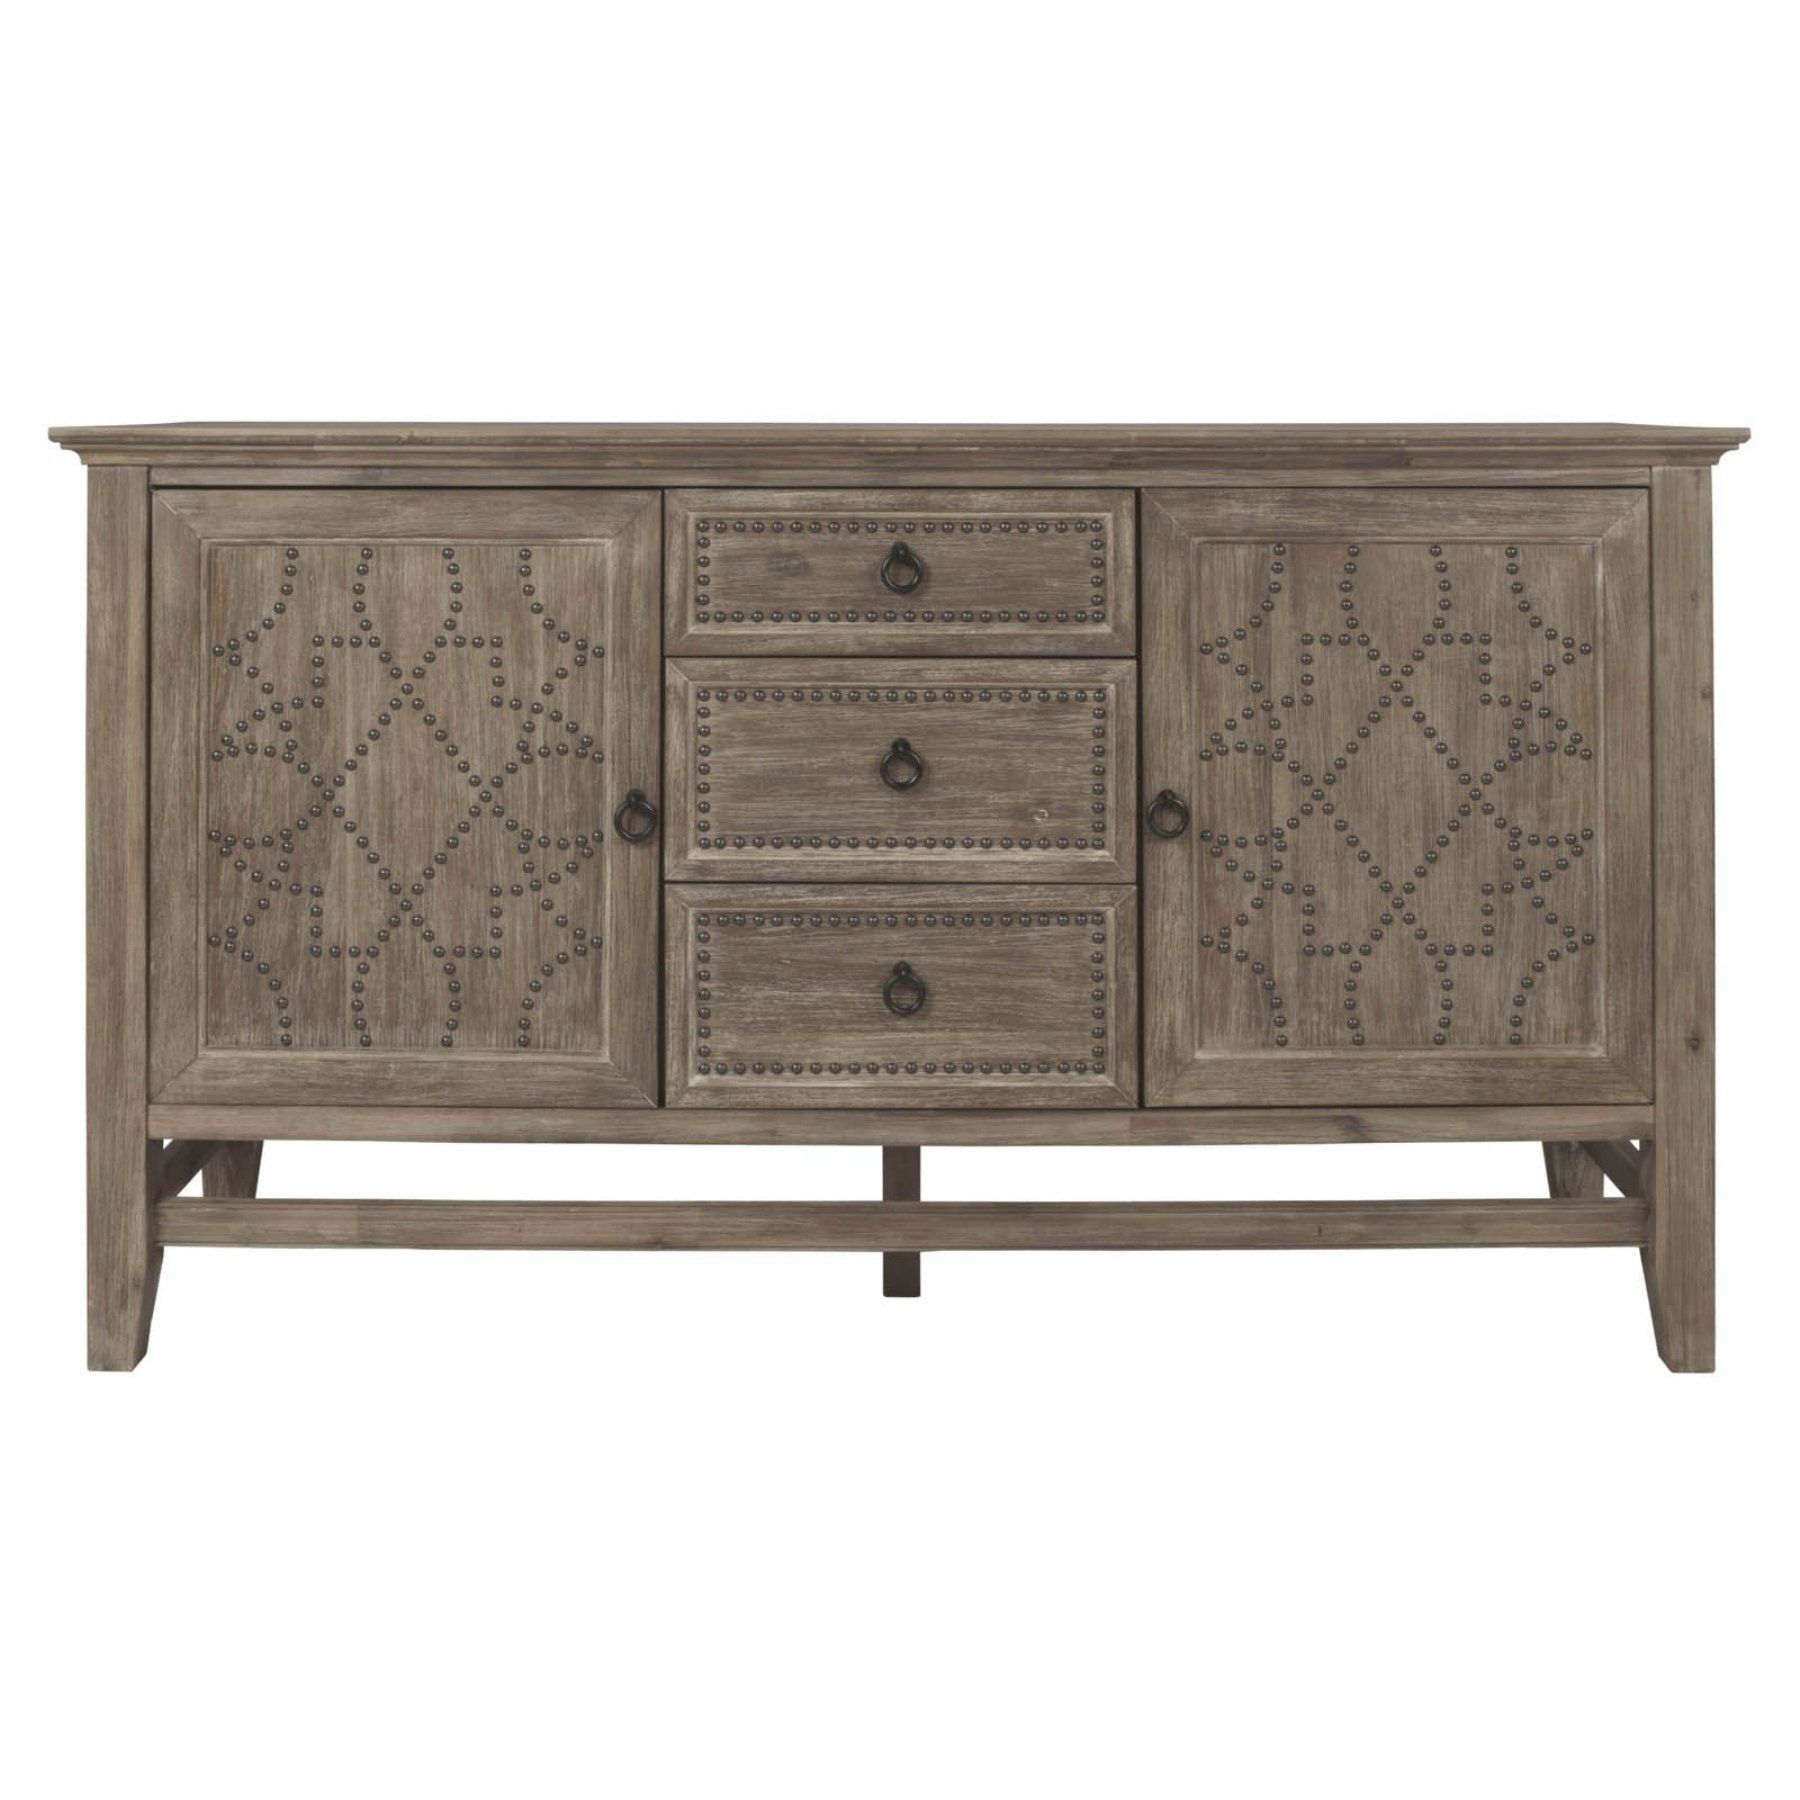 Orient Express Furniture Traditions Braxton Sideboard – 6092 In Hayter Sideboards (View 3 of 30)